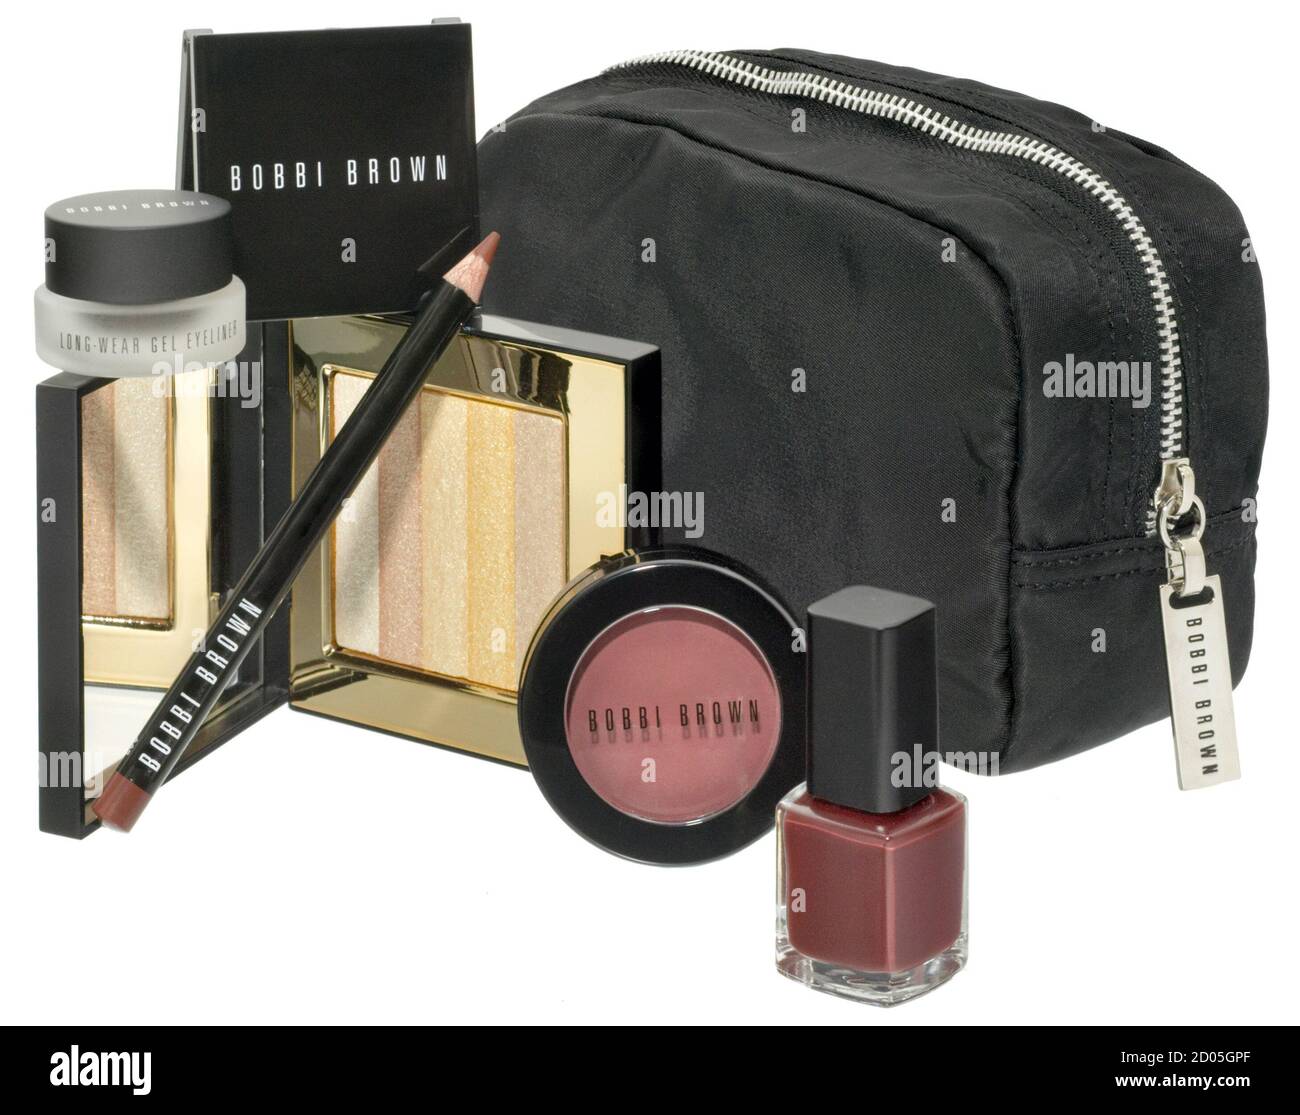 bobbi brown makeup travel kit photographed on a white background Stock Photo